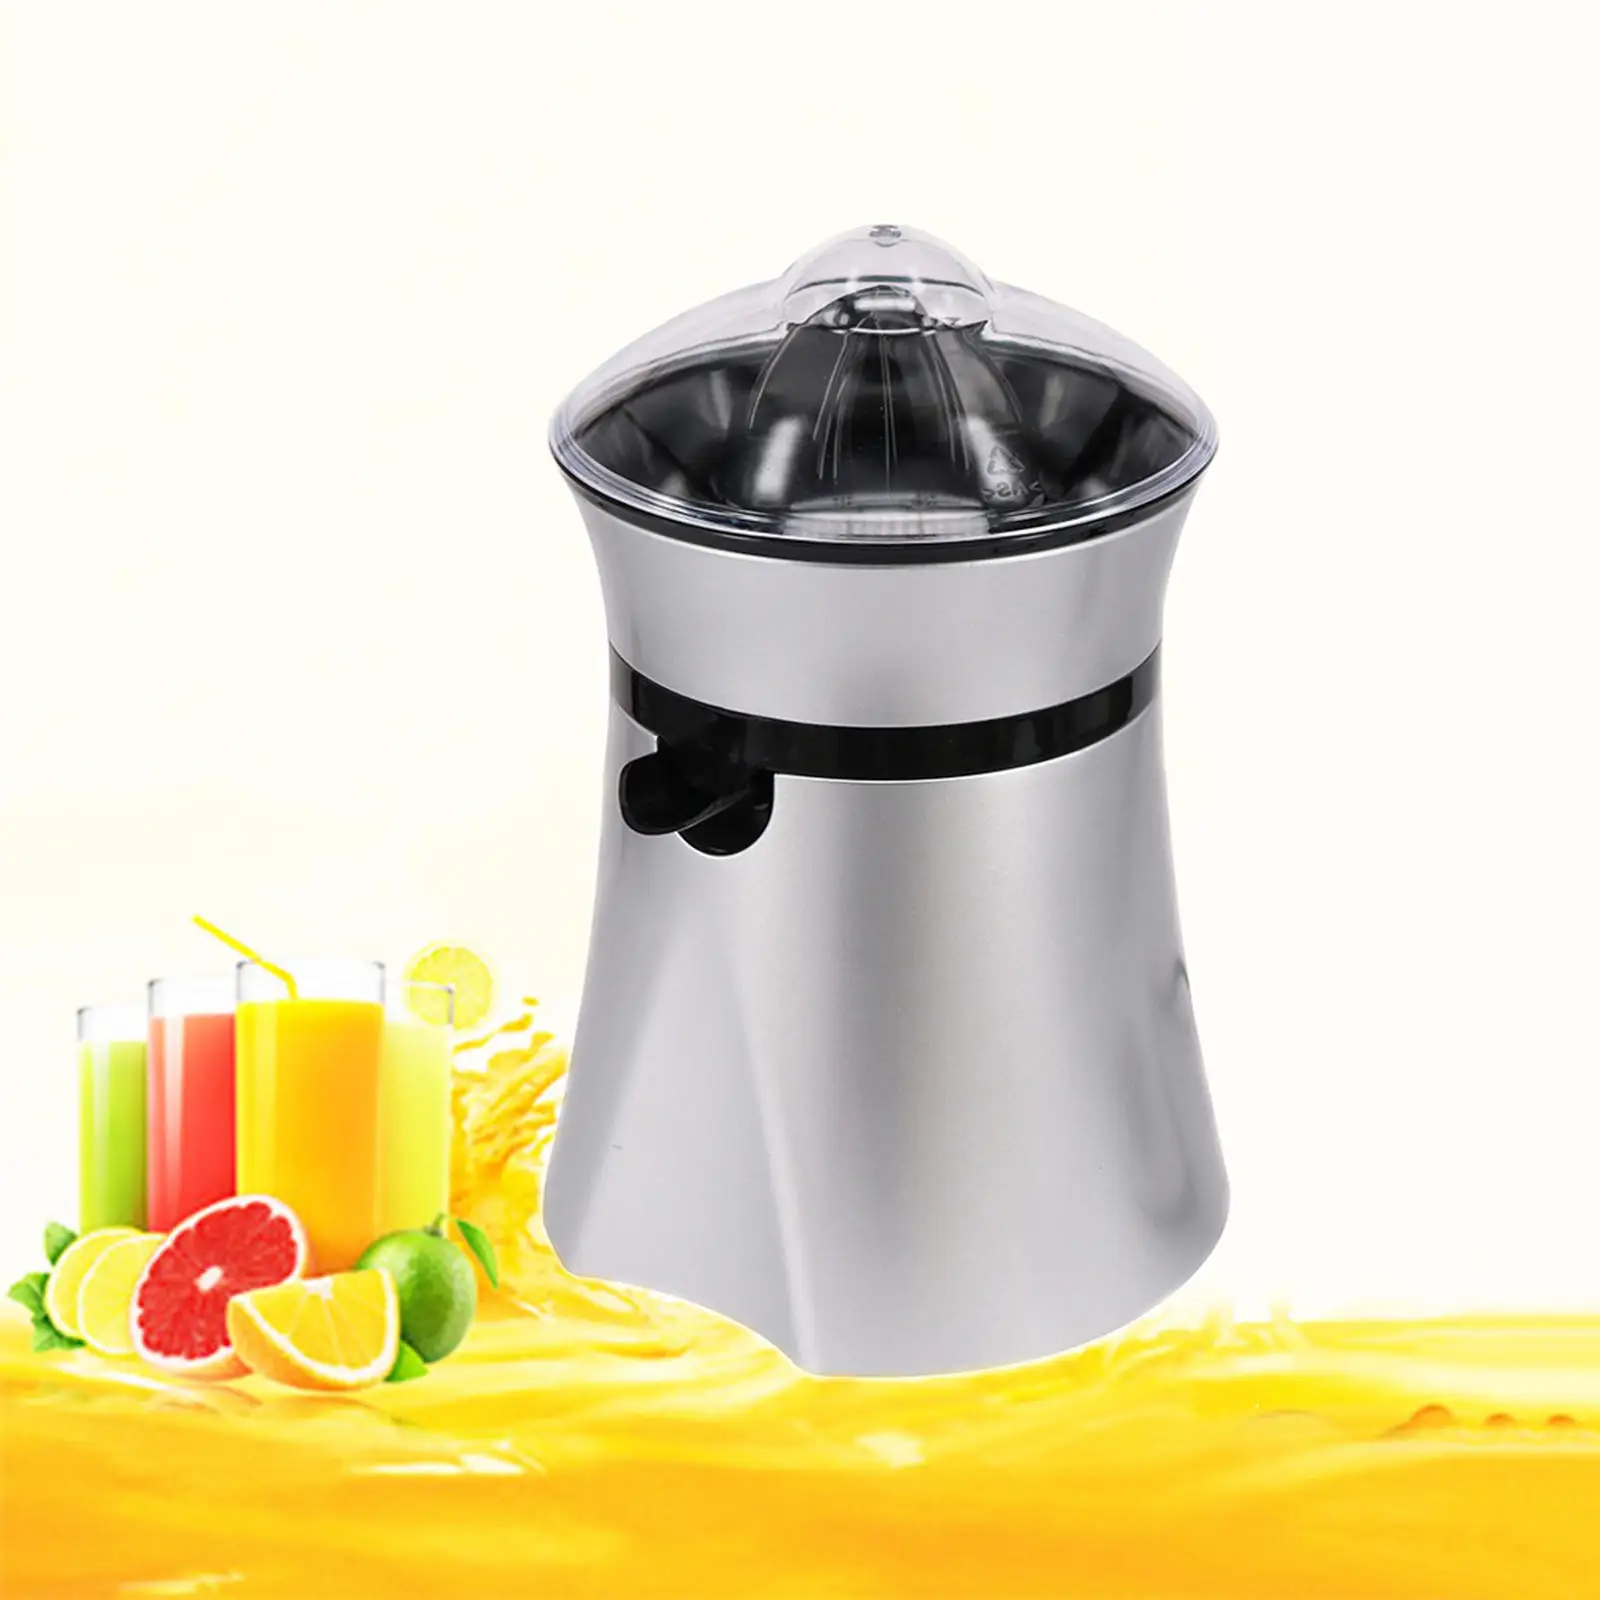 Stainless Steel Electric Juicer with Two Interchangeable Cones Electric Citrus Juicer Juice Maker Machine Blender